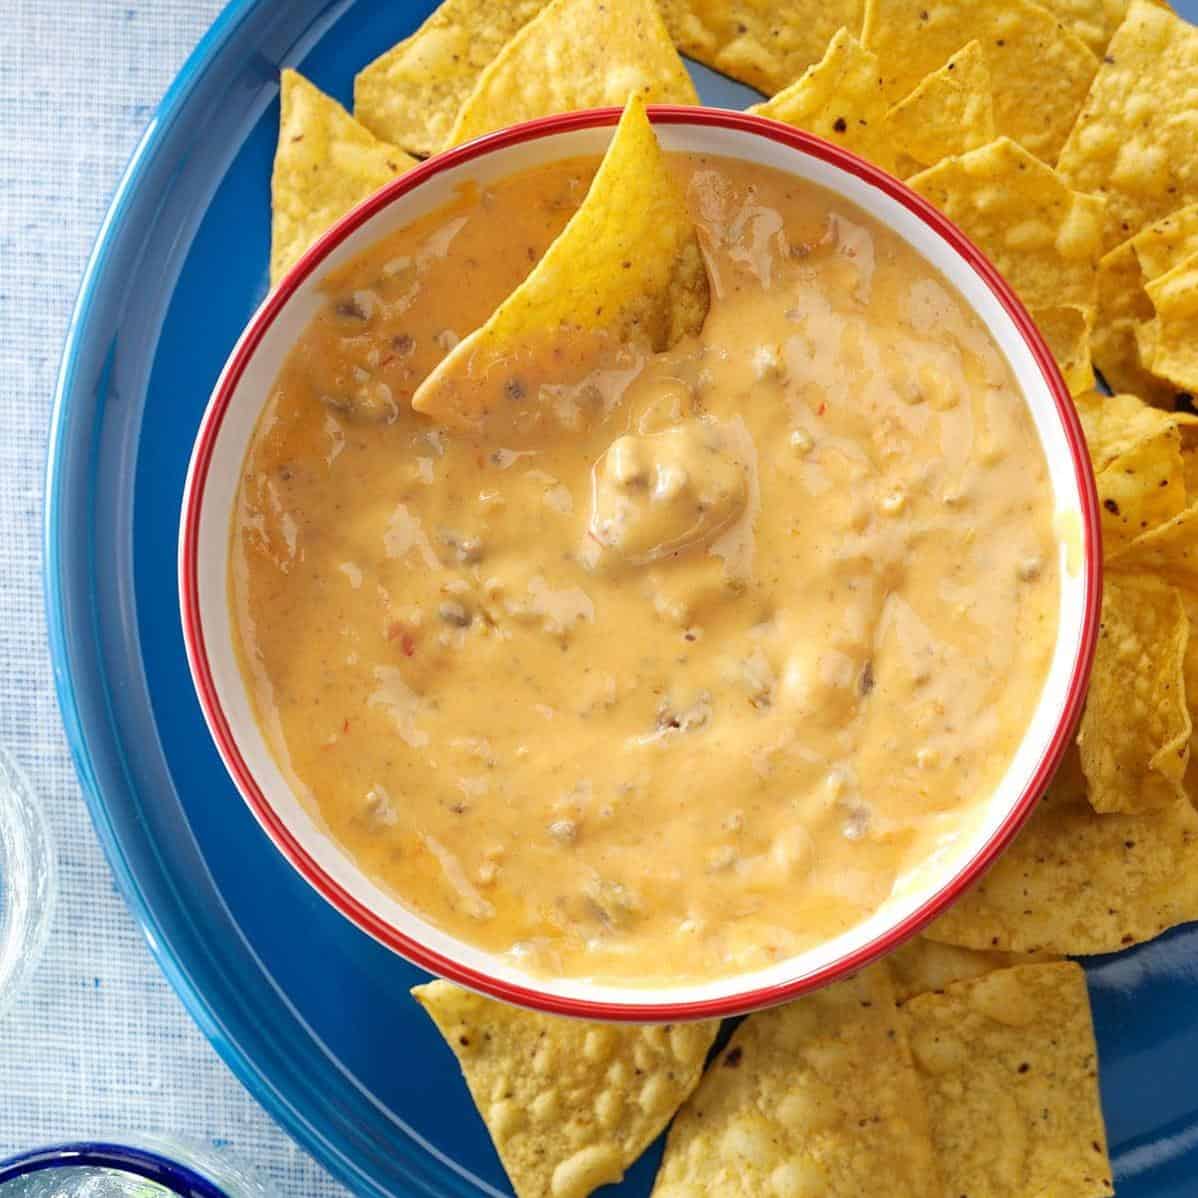  Dive into this cheesy, zesty dip!